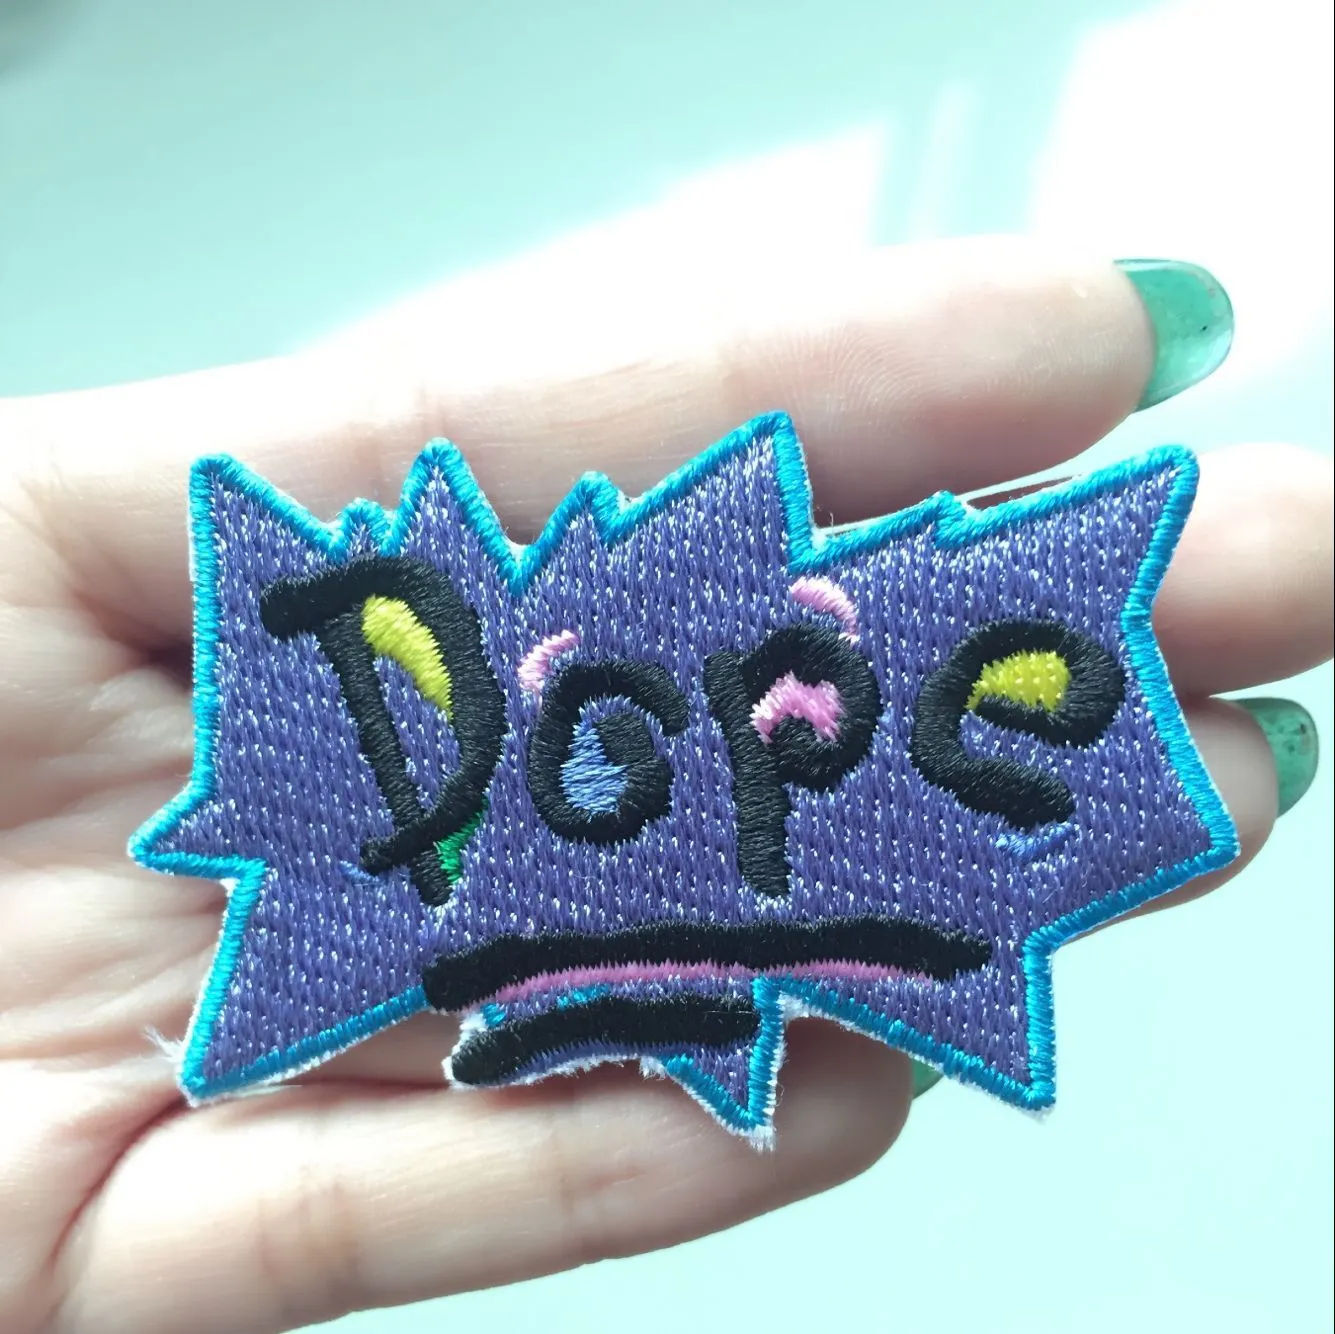 Green's House POP WOW Embroidered Iron-On Patch KID Cute Applique Clothing Accessory Badge Shirts Cartoon Stitch Patch 